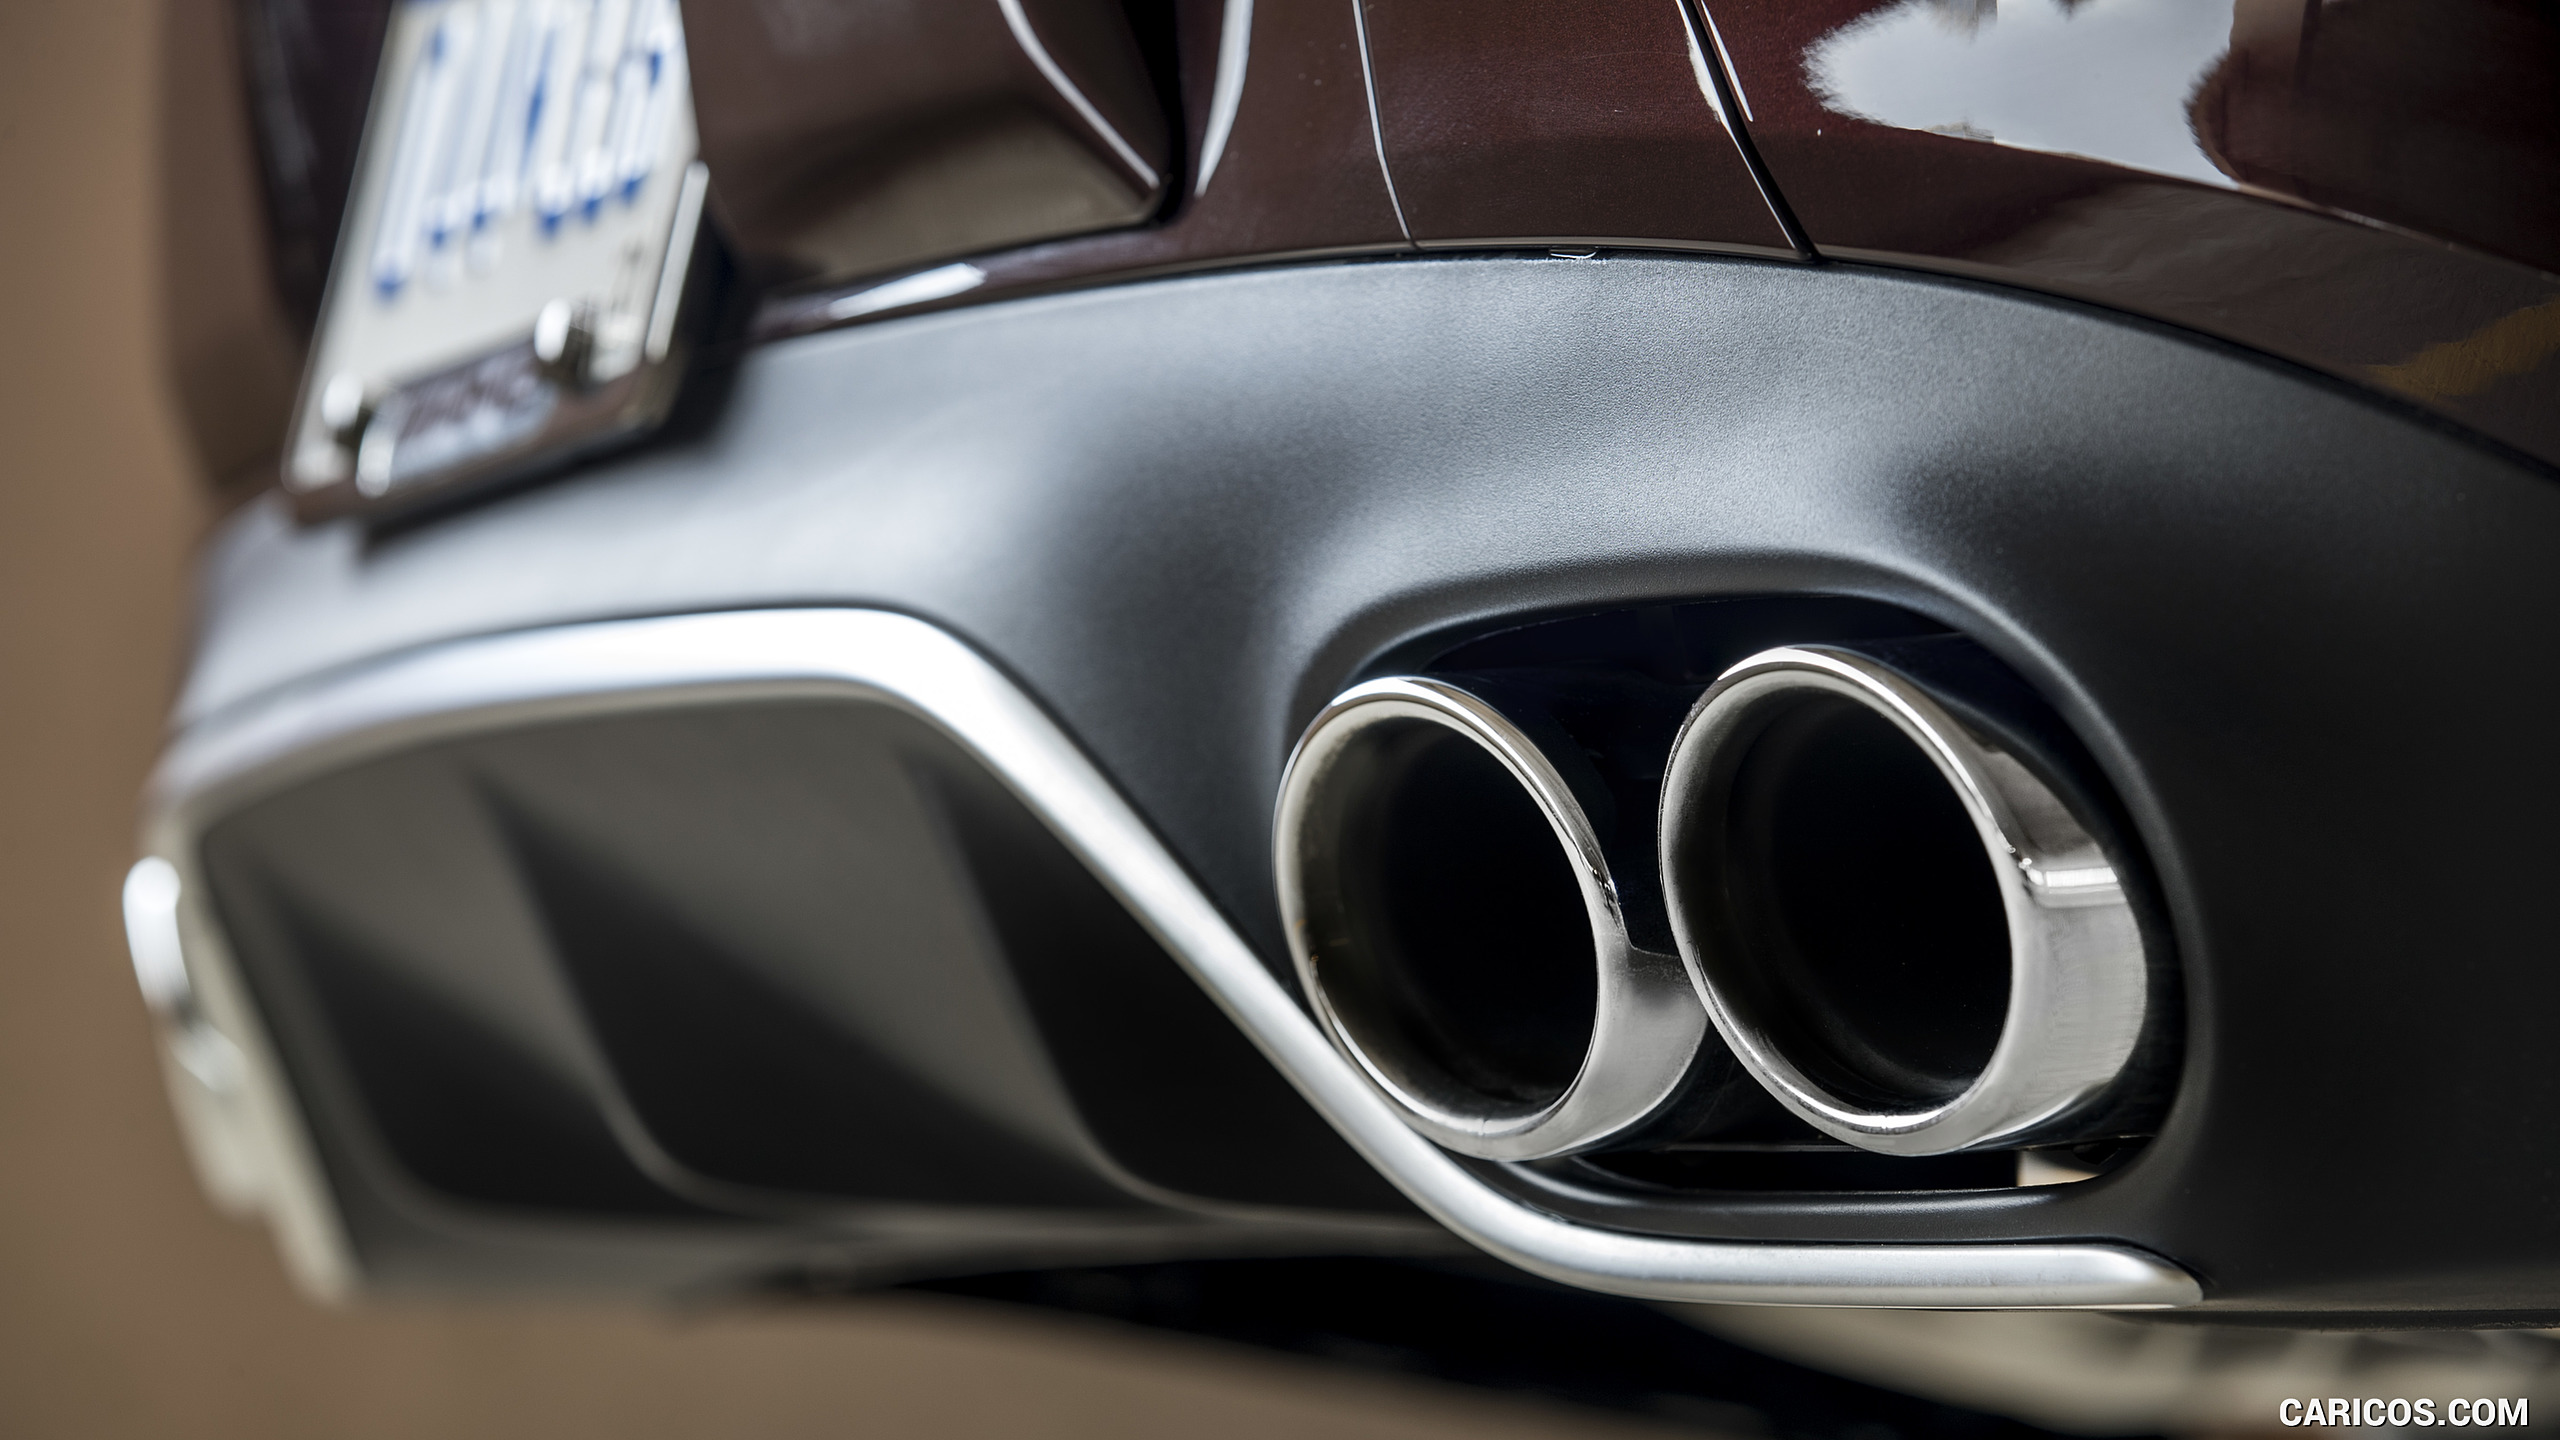 2019 Mercedes-AMG E 53 4MATIC+ Coupe (US-Spec) Wallpaper - Exhaust, #159 of 193